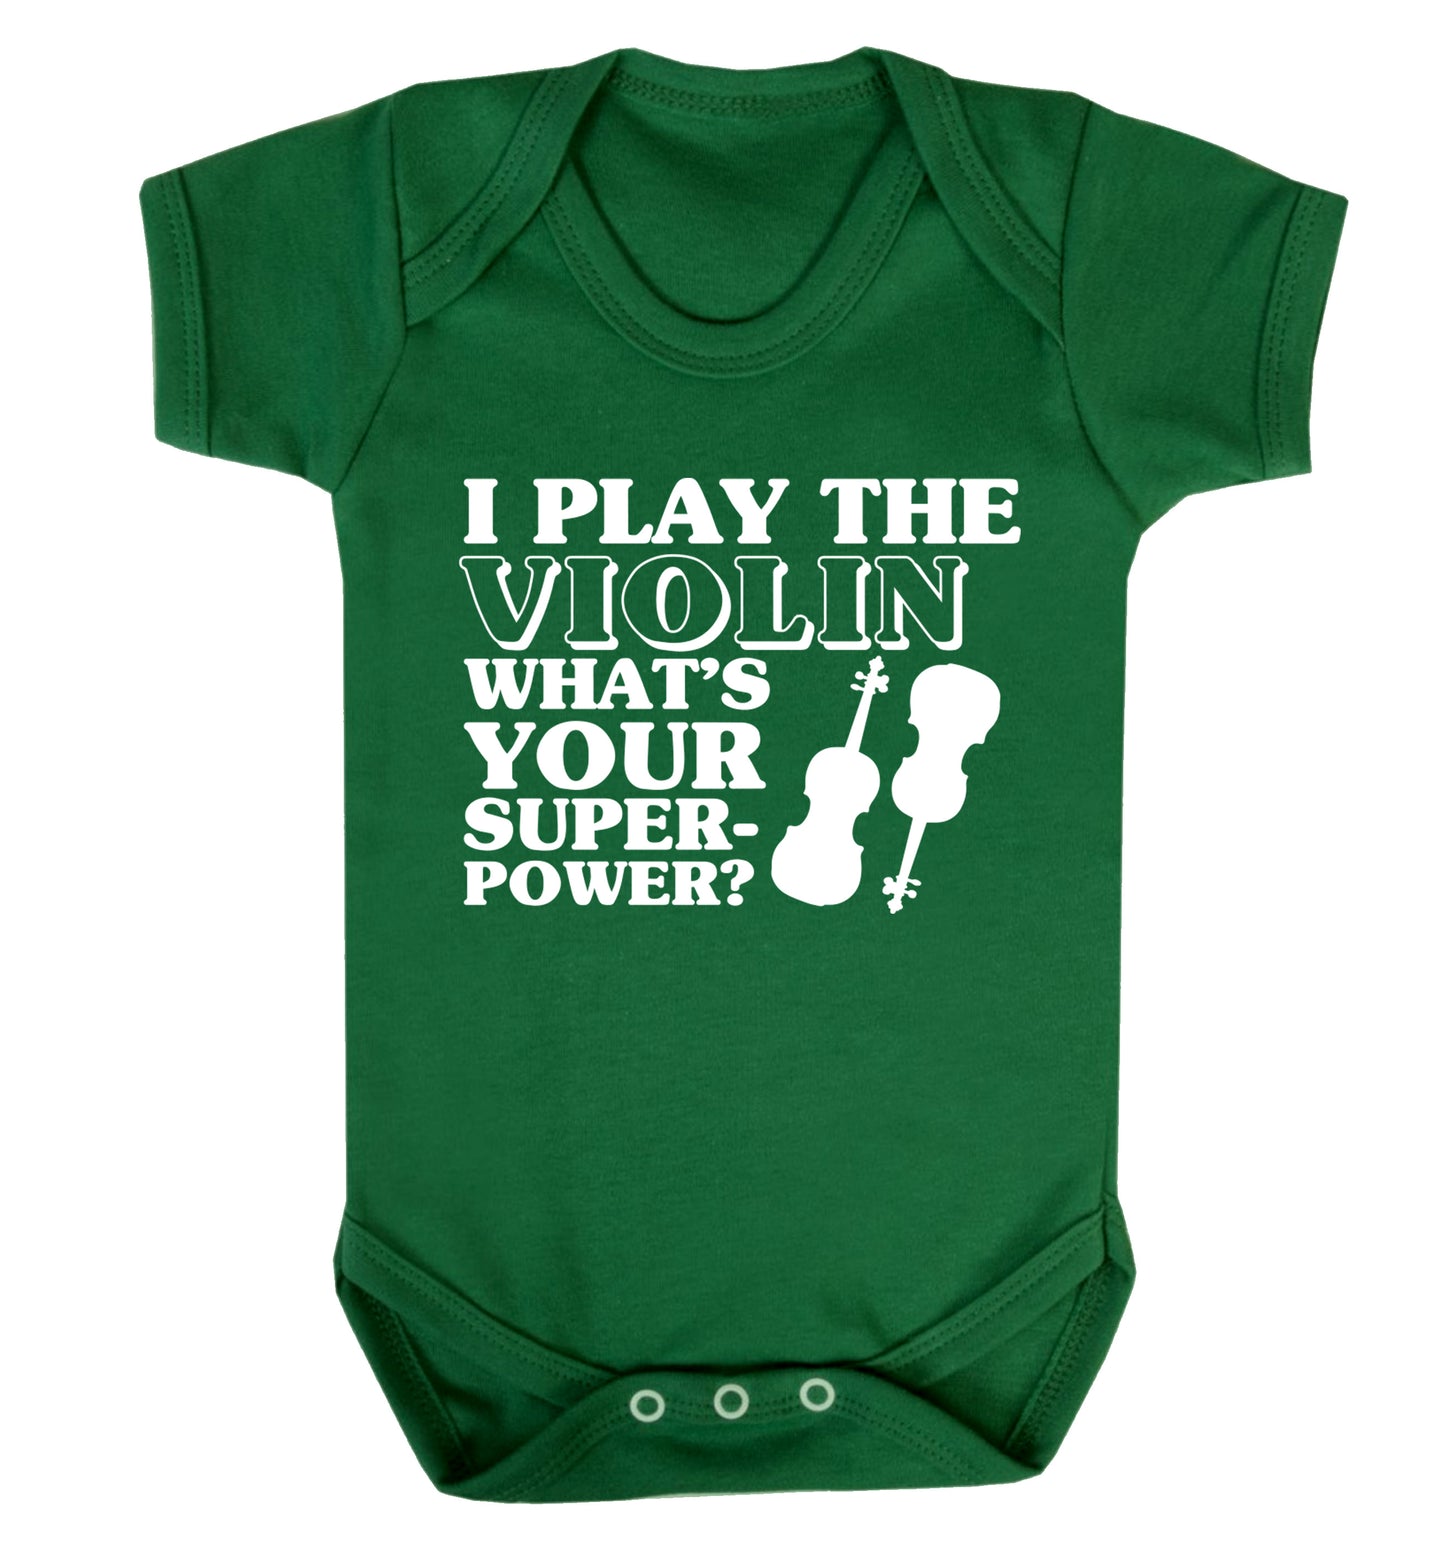 I Play Violin What's Your Superpower? Baby Vest green 18-24 months